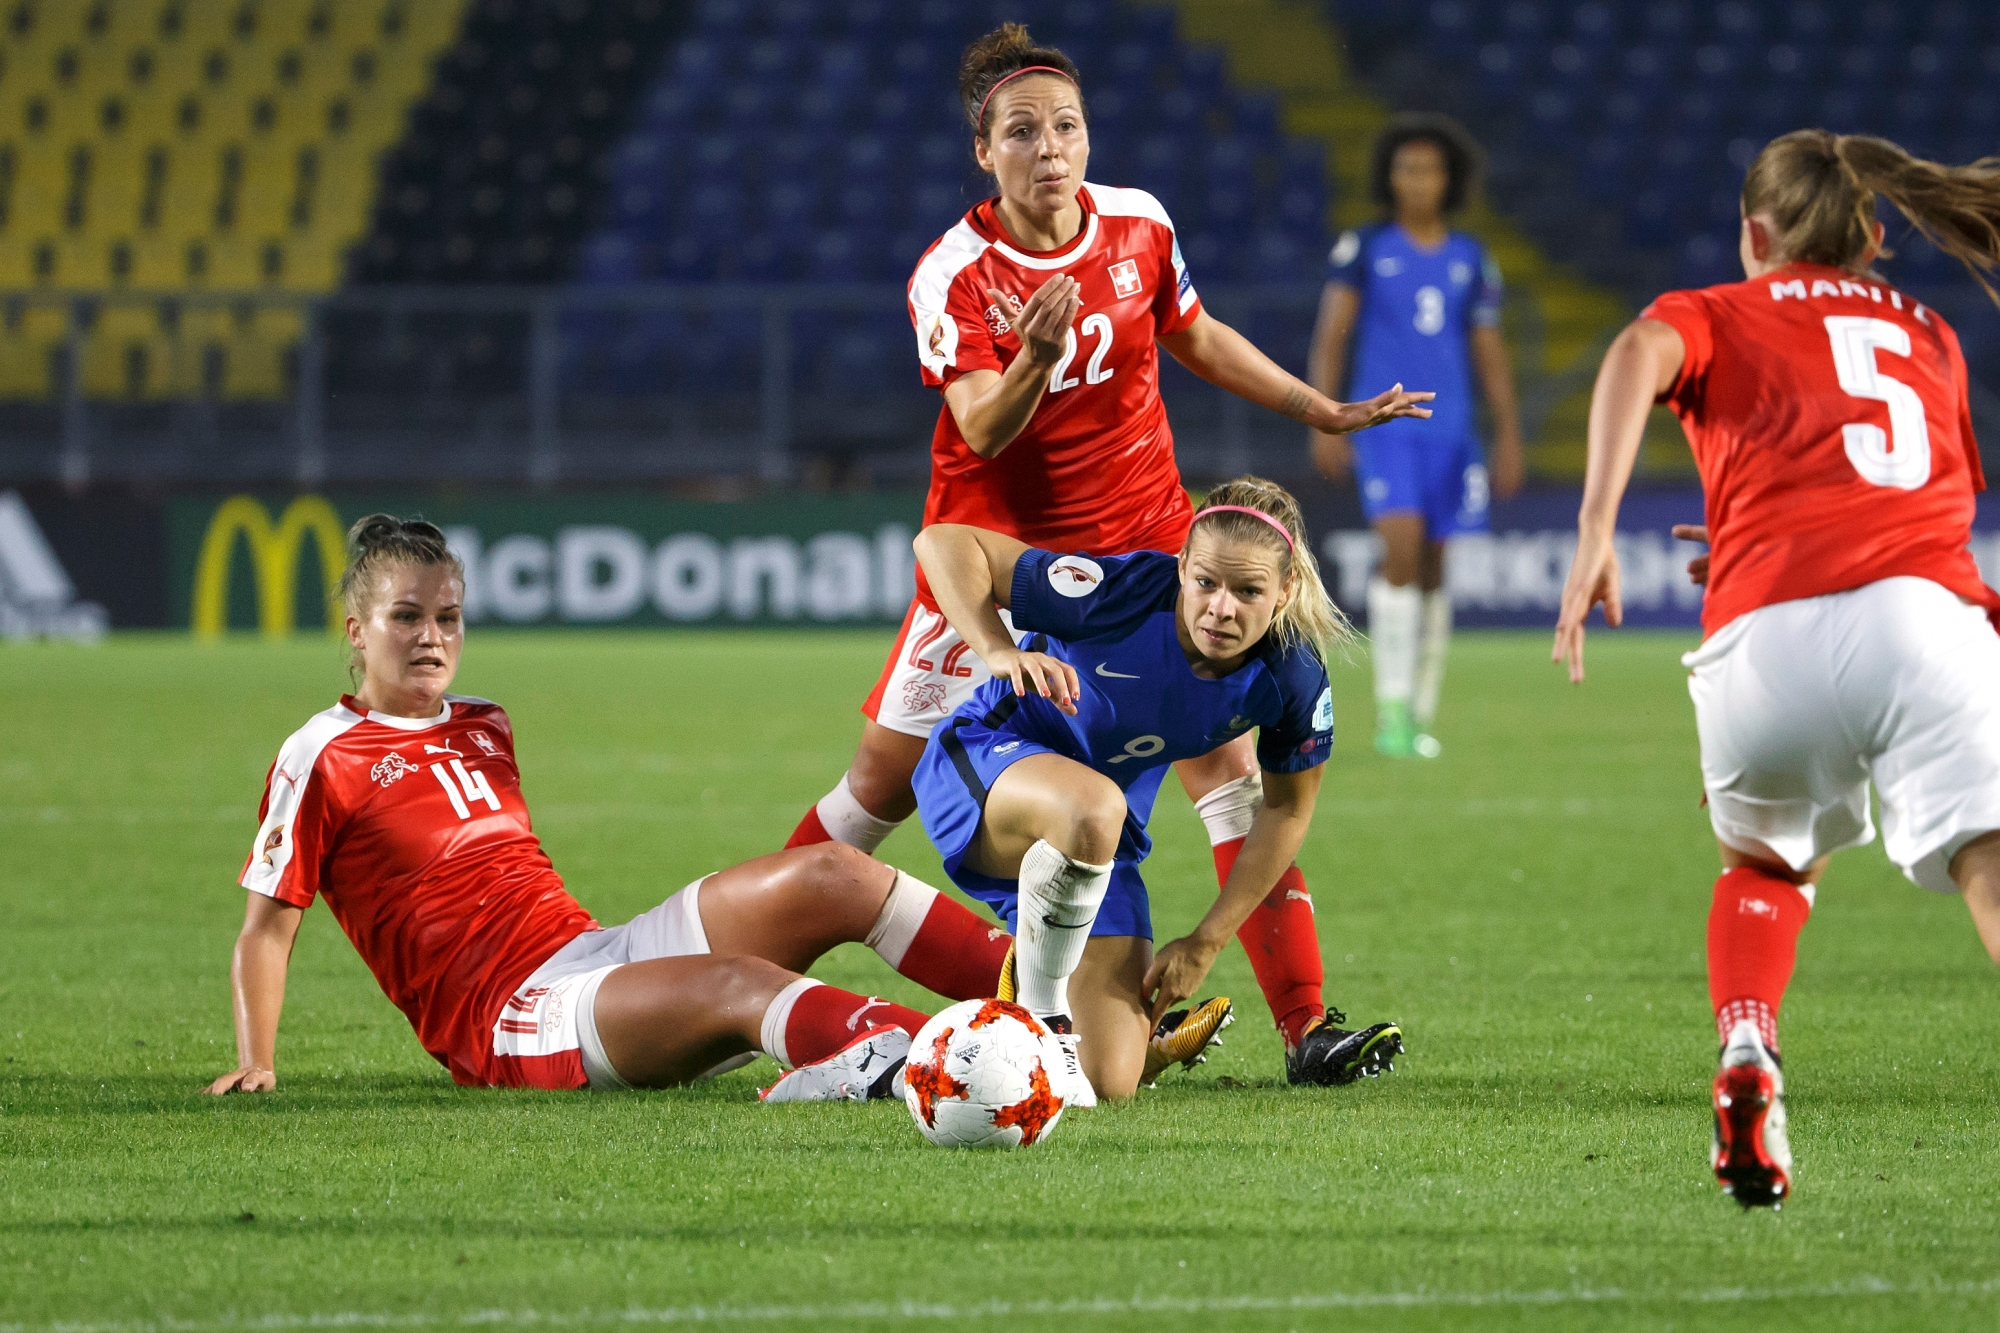 CAPTION CORRECTION: CORRECTS NAME - France's midfielder Eugenie Le Sommer, 2nd right, fights for the ball with Switzerland's players defender Rahel Kiwic, left, midfielder Vanessa Bernauer, center, and defender Noelle Maritz, right, during the UEFA Women's Euro 2017 group C preliminary round match between Switzerland and France, at the Rat Verlegh stadium, in Breda, The Netherlands, Wednesday, July 26, 2017. (KEYSTONE/Salvatore Di Nolfi) NETHERLANDS SOCCER WOMEN UEFA EURO 2017 CHE FRA